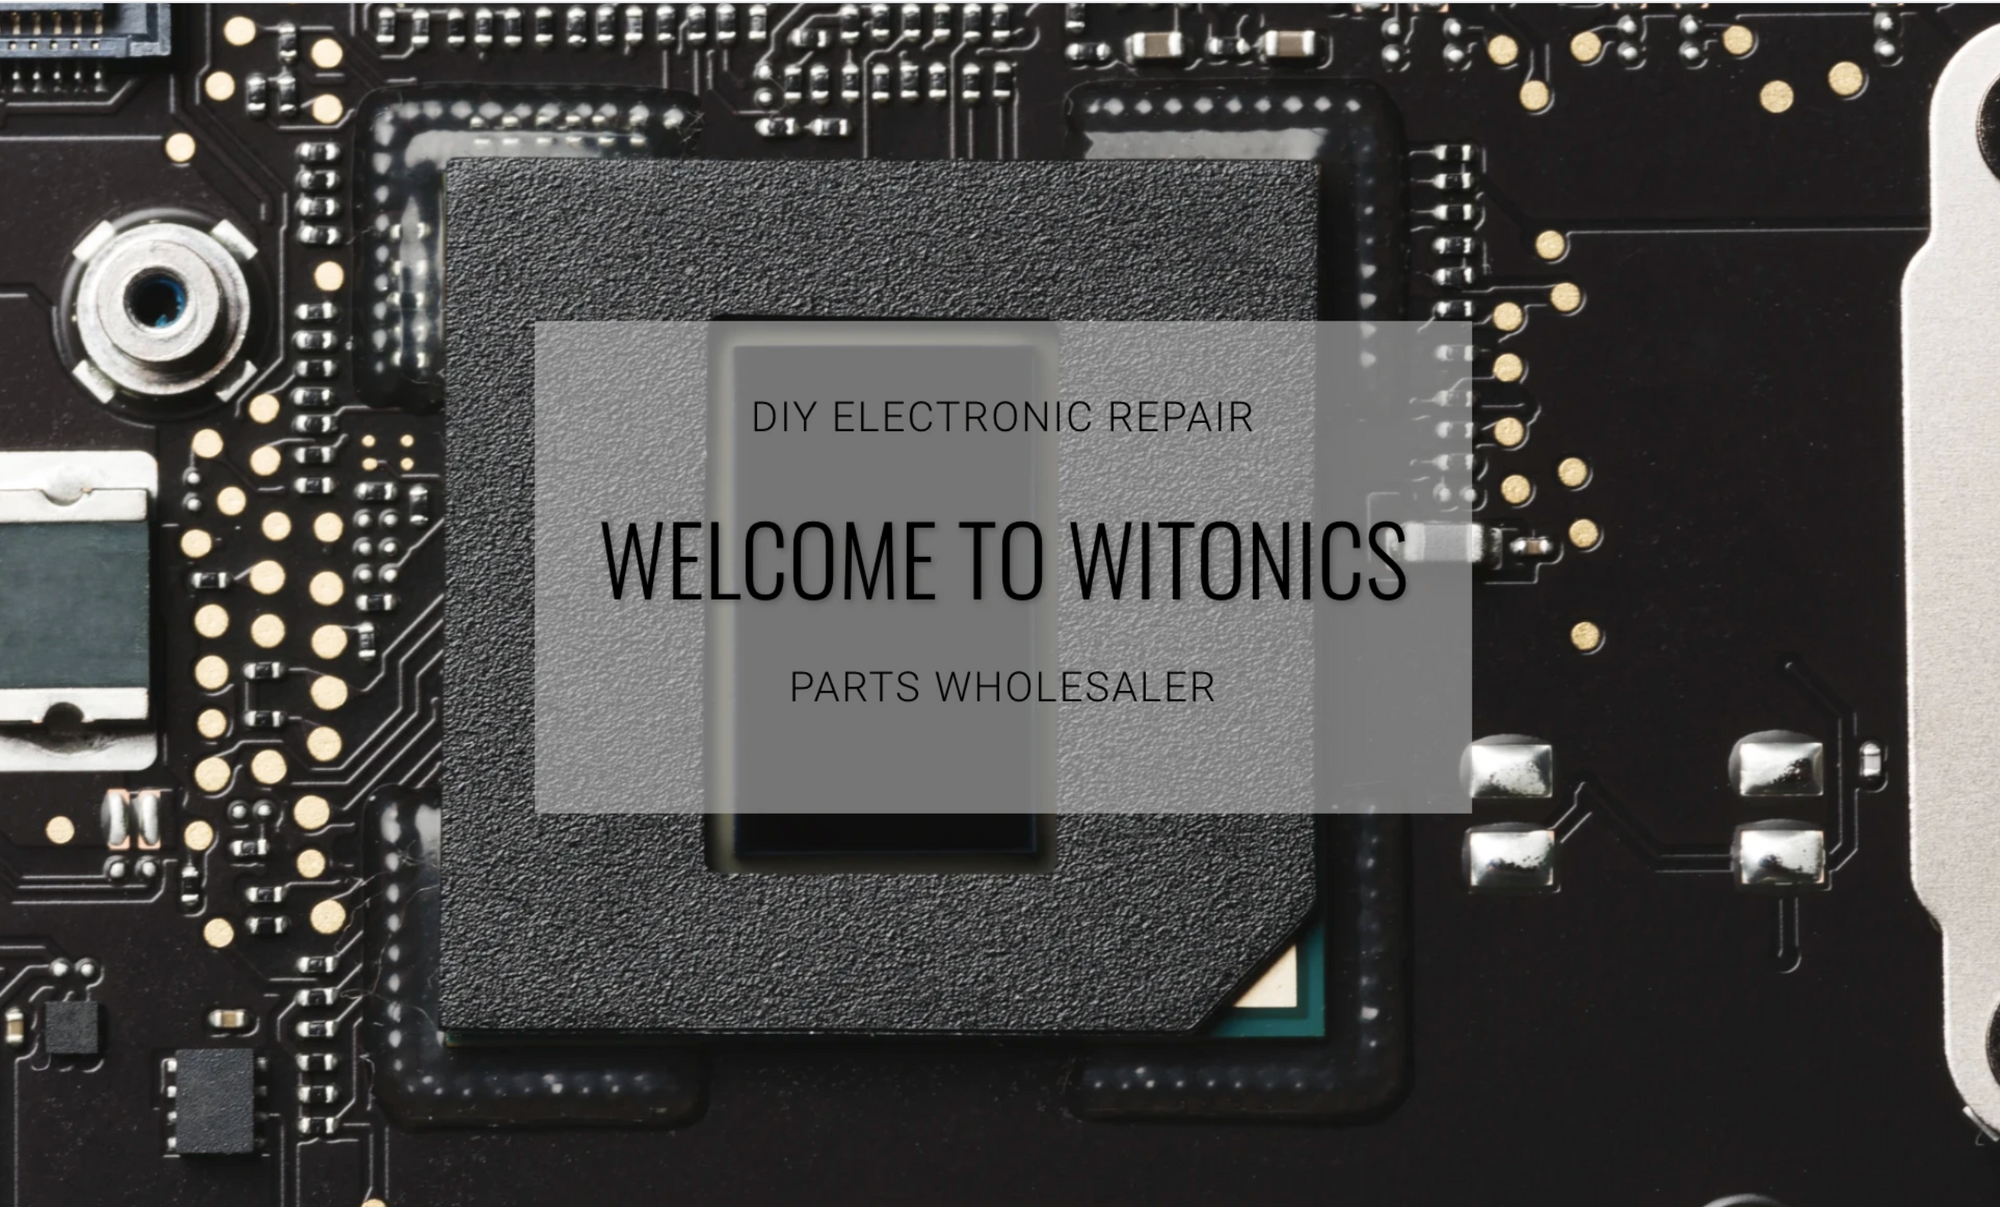 Welcome to witonics